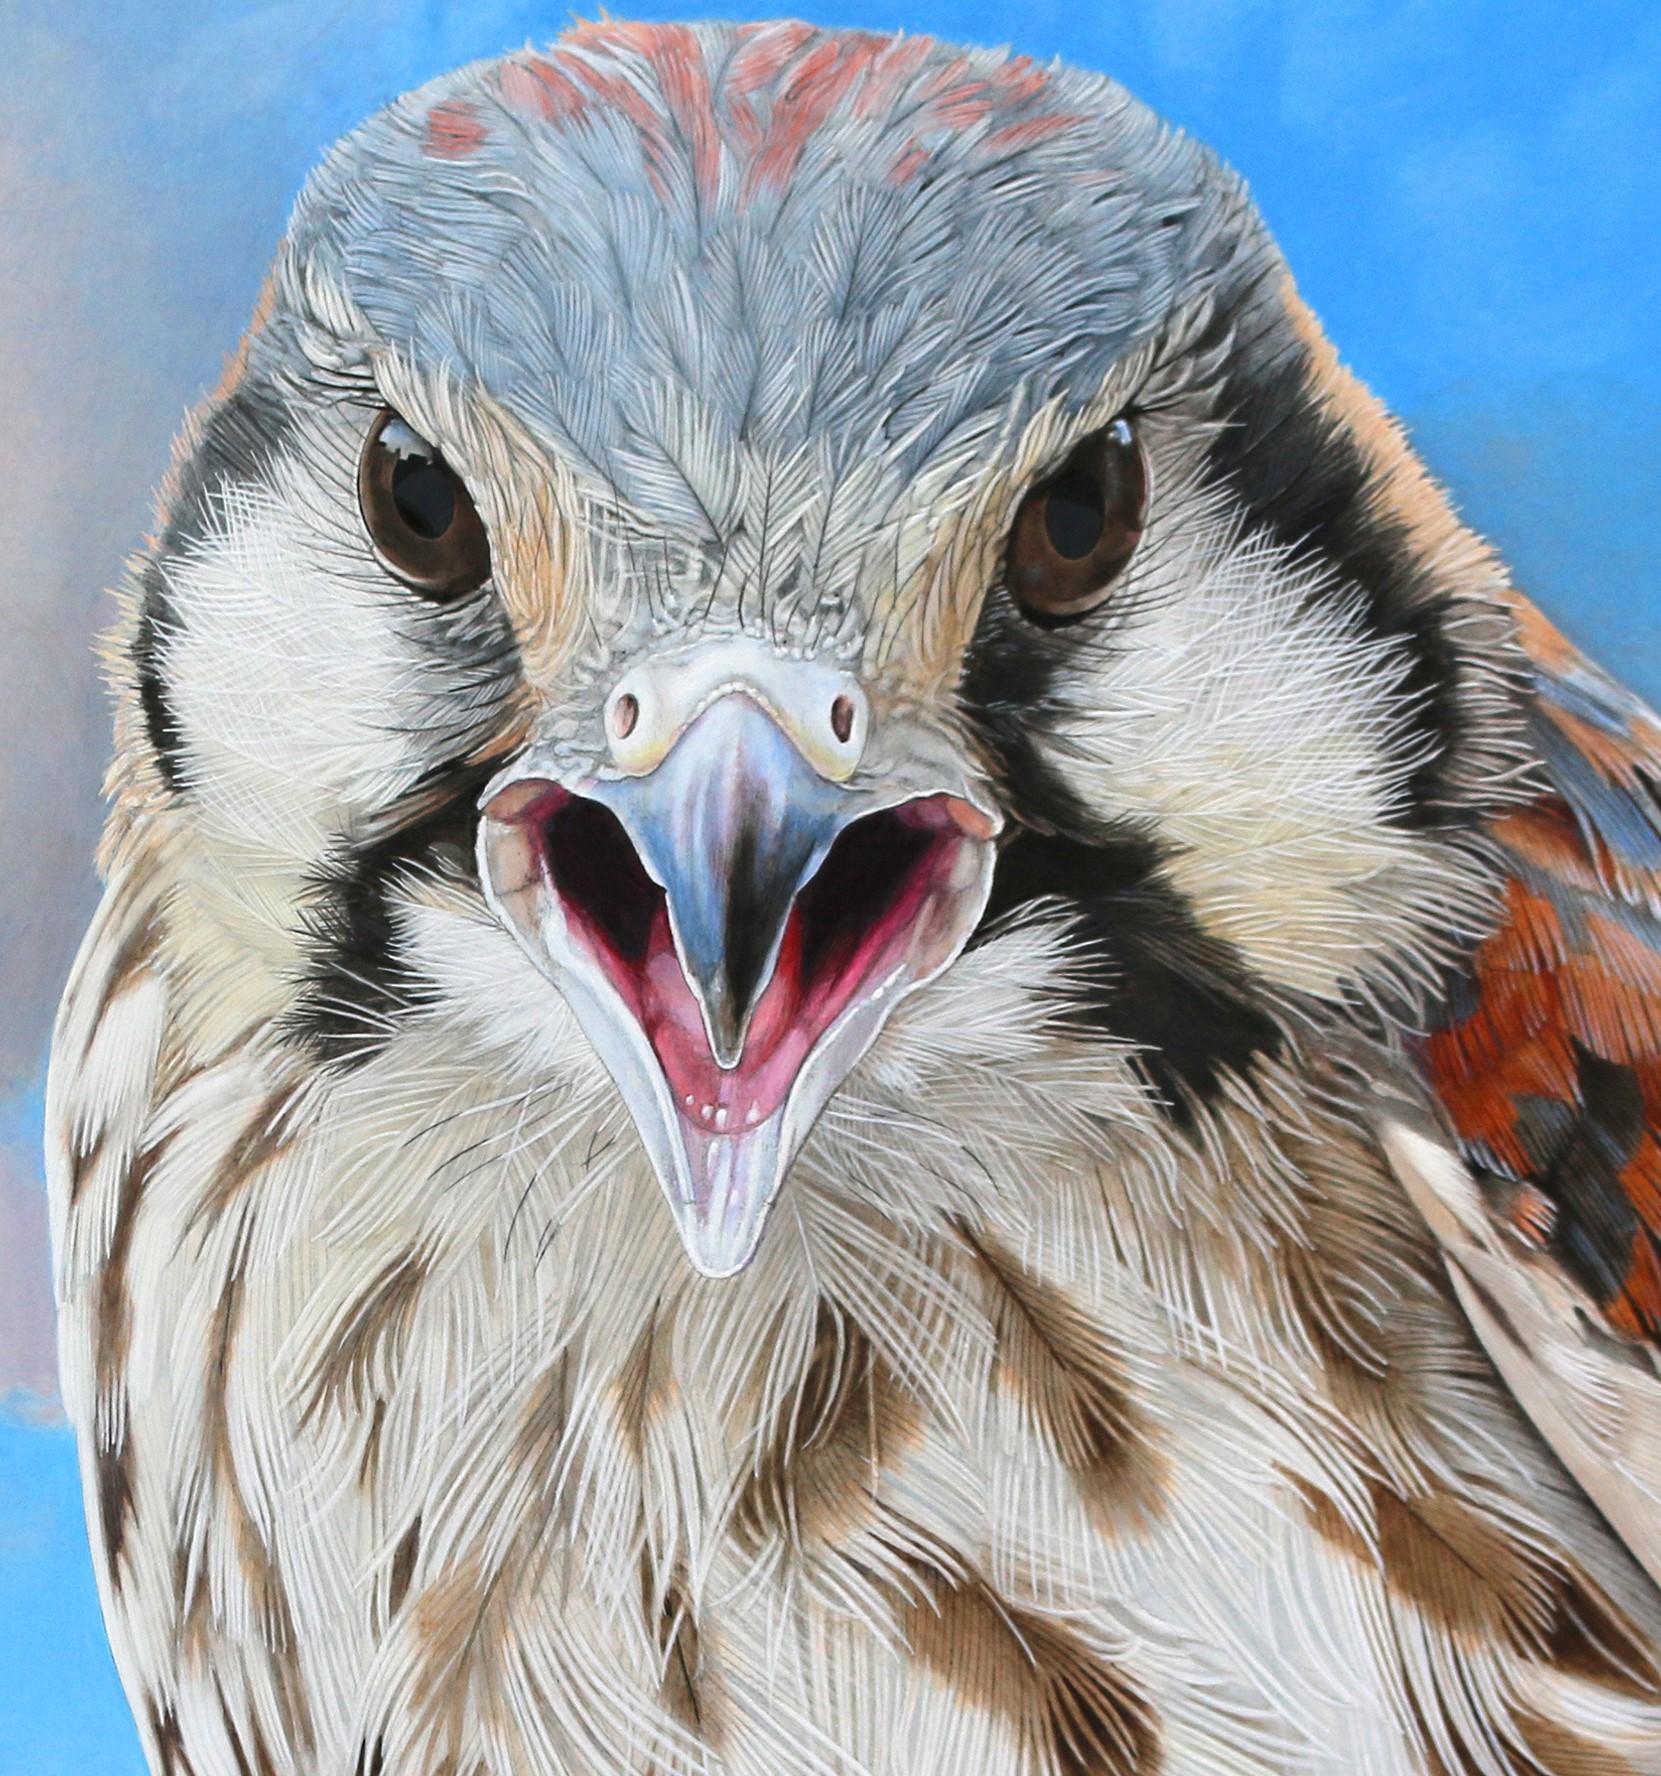 Screaming Young Kestral II - Photorealistic Bird Portrait, Cloud Covered Sky  - Painting by Rick Pas